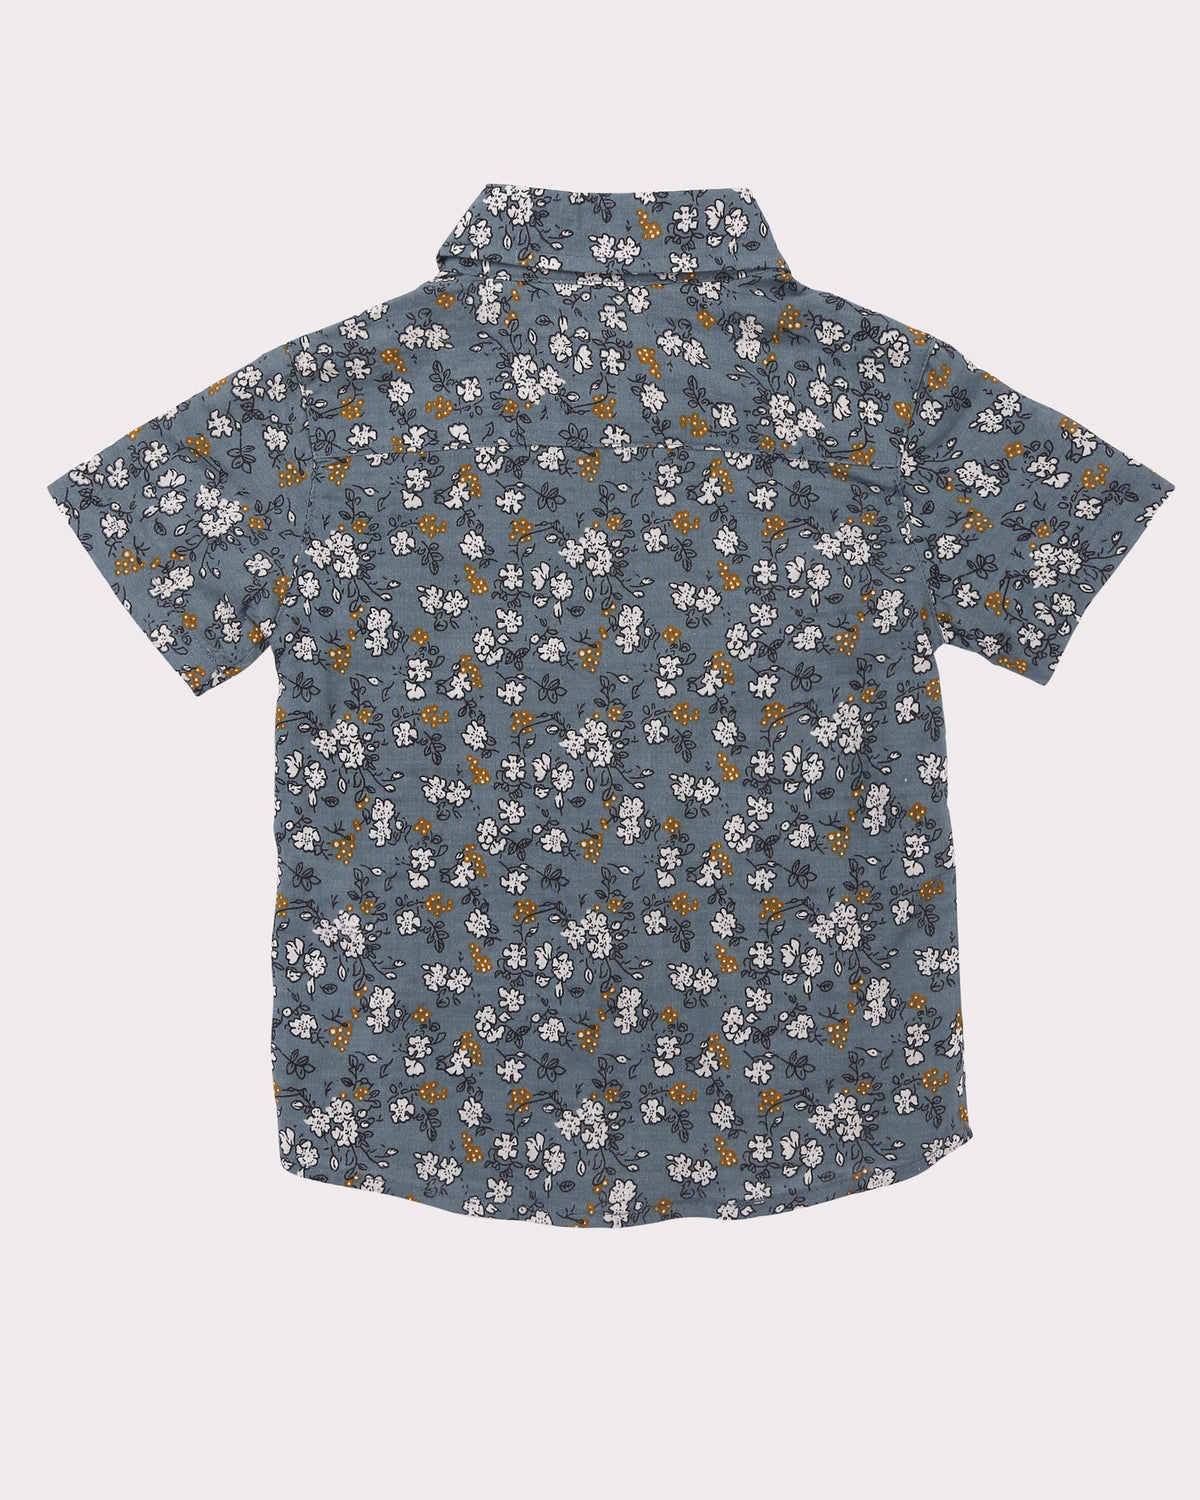 Clover Field Shirt in Teal back